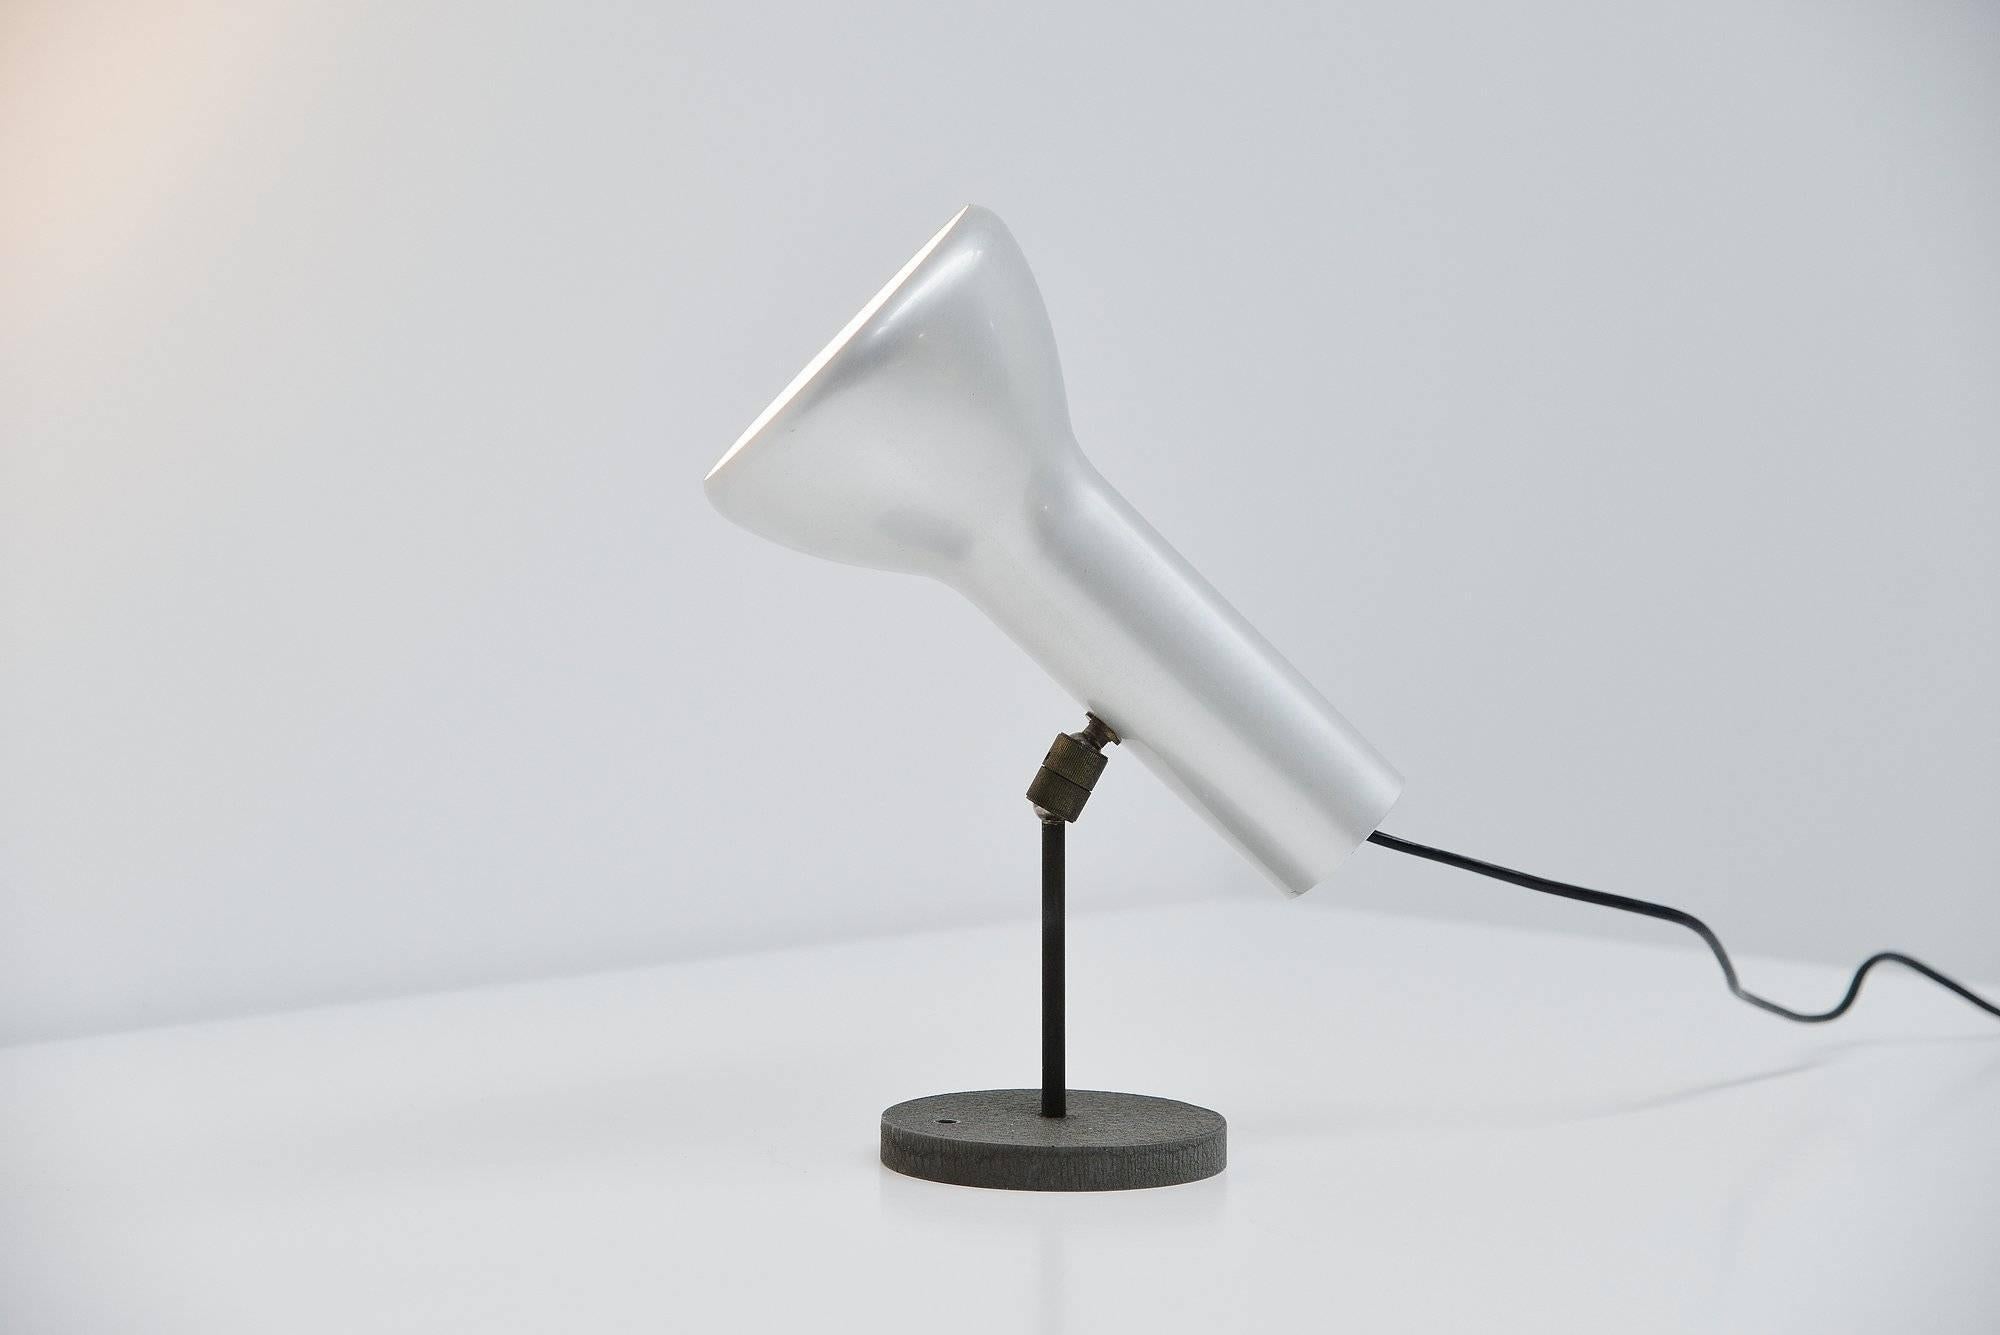 Rare wall or table lamp version of model 7 designed by Gino Sarfatti, manufactured by Arteluce, Italy 1957. I have never seen this fairly unique version before. This is the table version of model 7 which is only documented as wall version in the